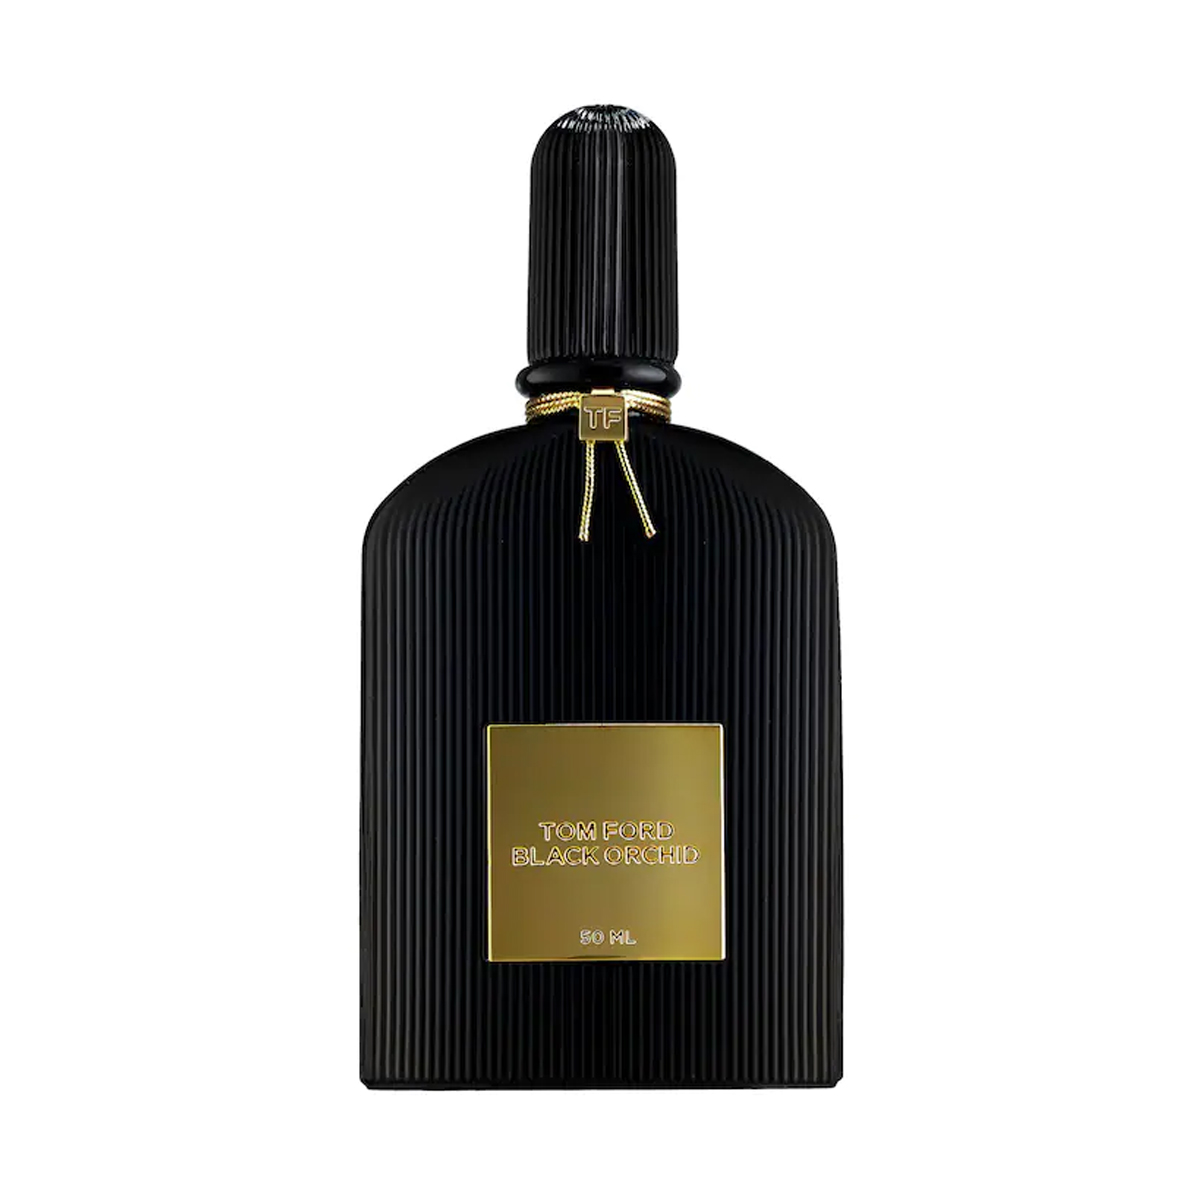 20 Expensive-Smelling Perfumes That Are So Sophisticated